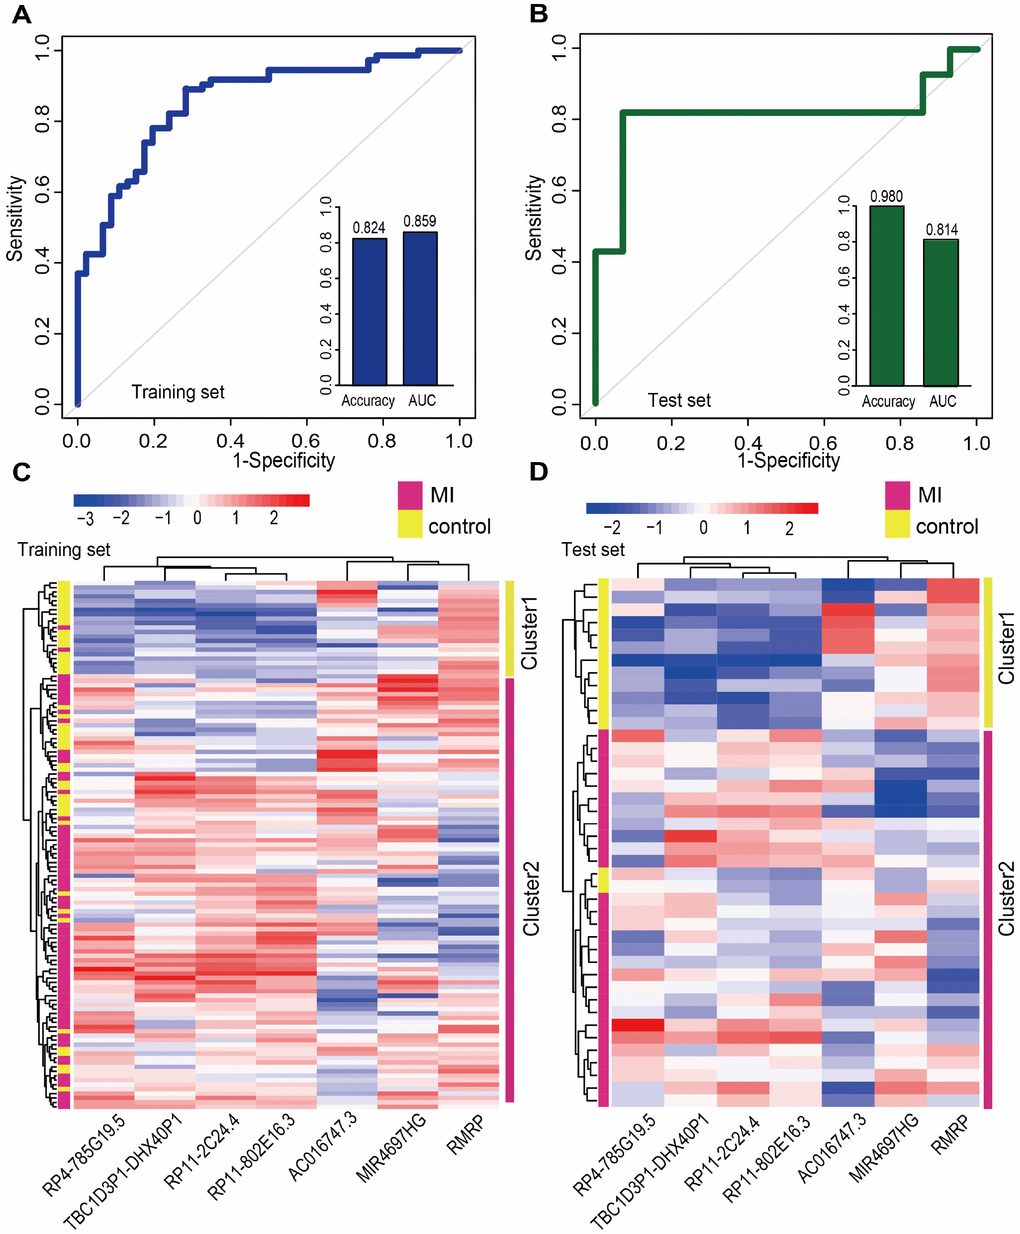 Classification performance of diagnostic lncRNA biomarkers for MI. Performance evaluation of the 7 diagnostic lncRNA biomarkers in the training (A) and test (B) sets using 5-fold cross-validation. Hierarchical clustering heat map of the expression profiles of 7 lncRNAs in (C) the training set (119 samples) and (D) the test set (42 samples).